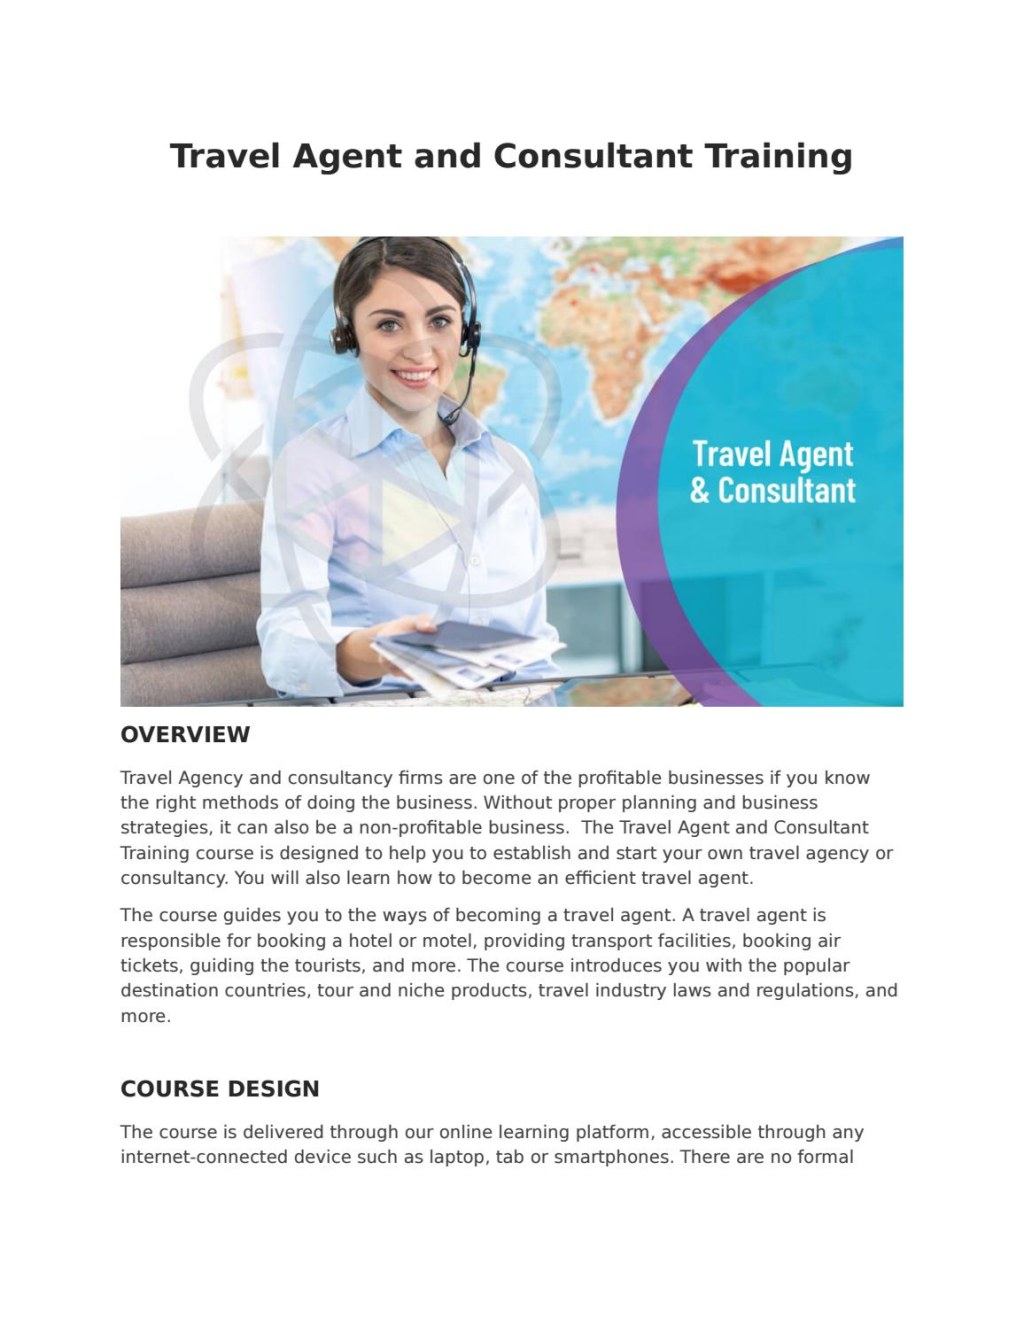 travel planning training courses - Travel agent and consultant training by One Education - Issuu